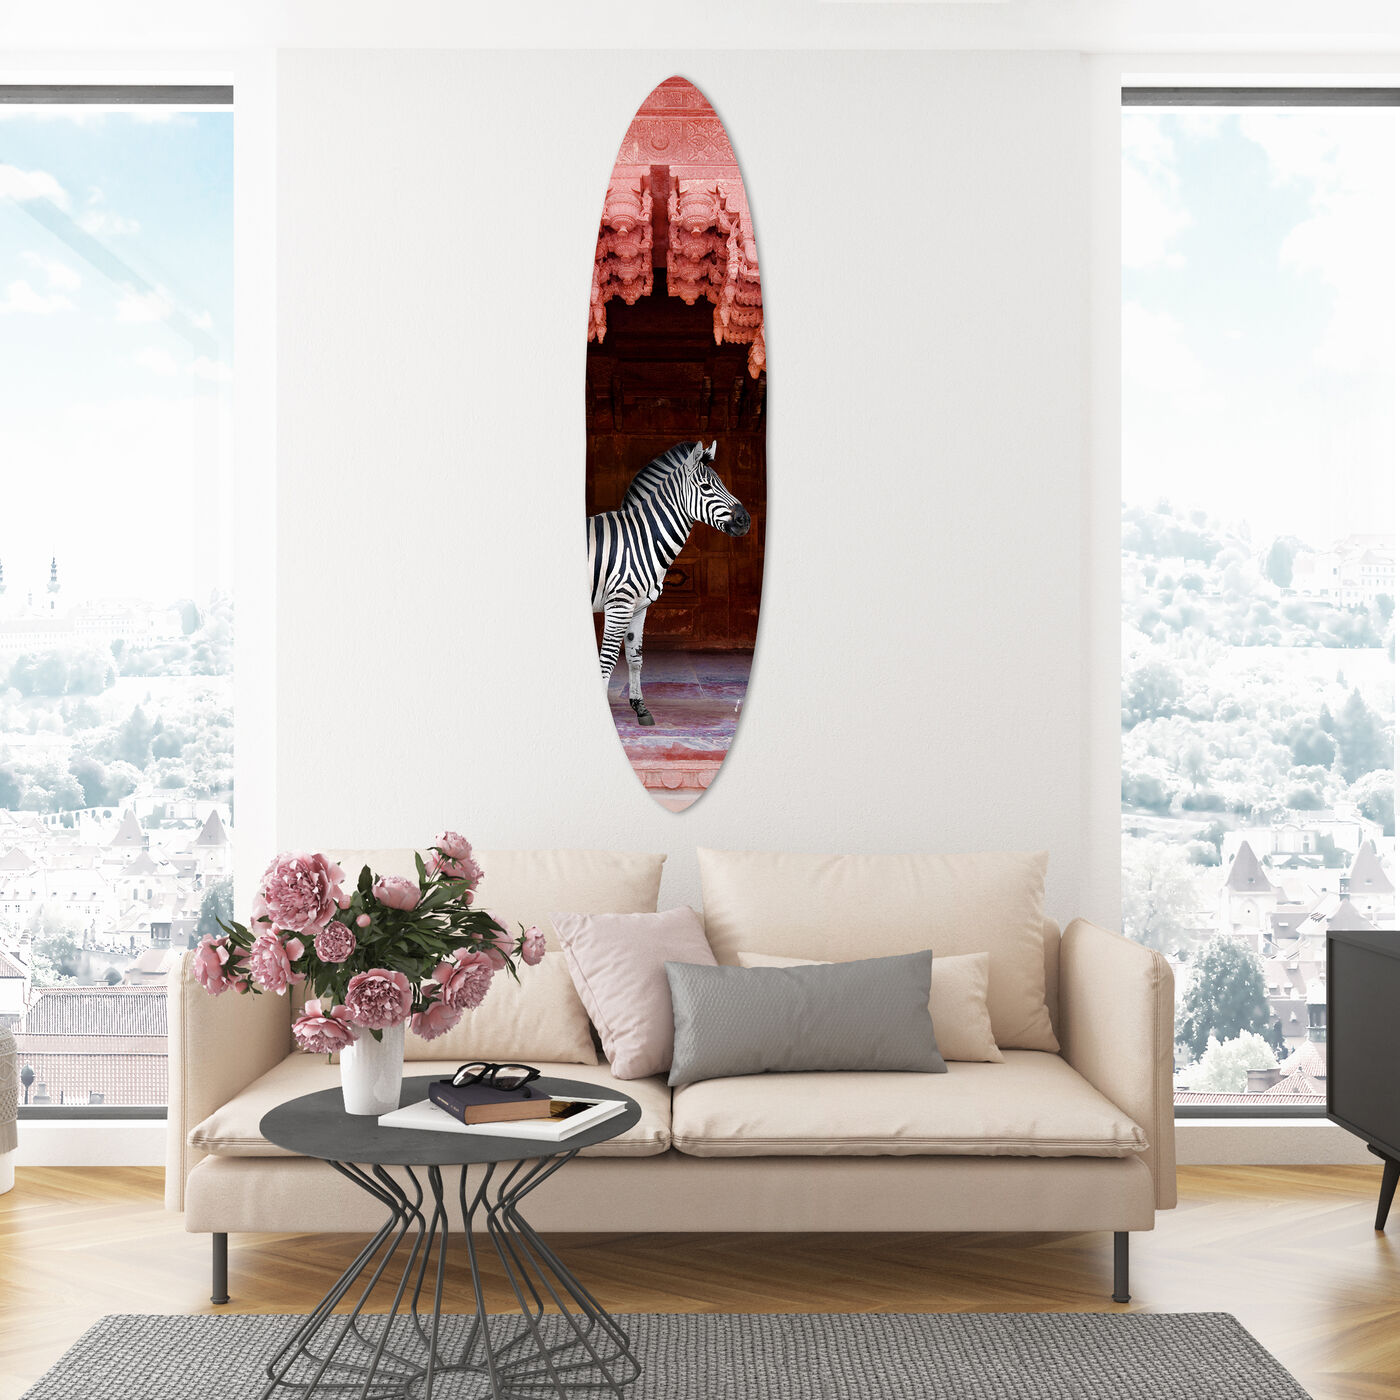 Zebras Apartment is Coral Pink - Decorative Acrylic Surfboard